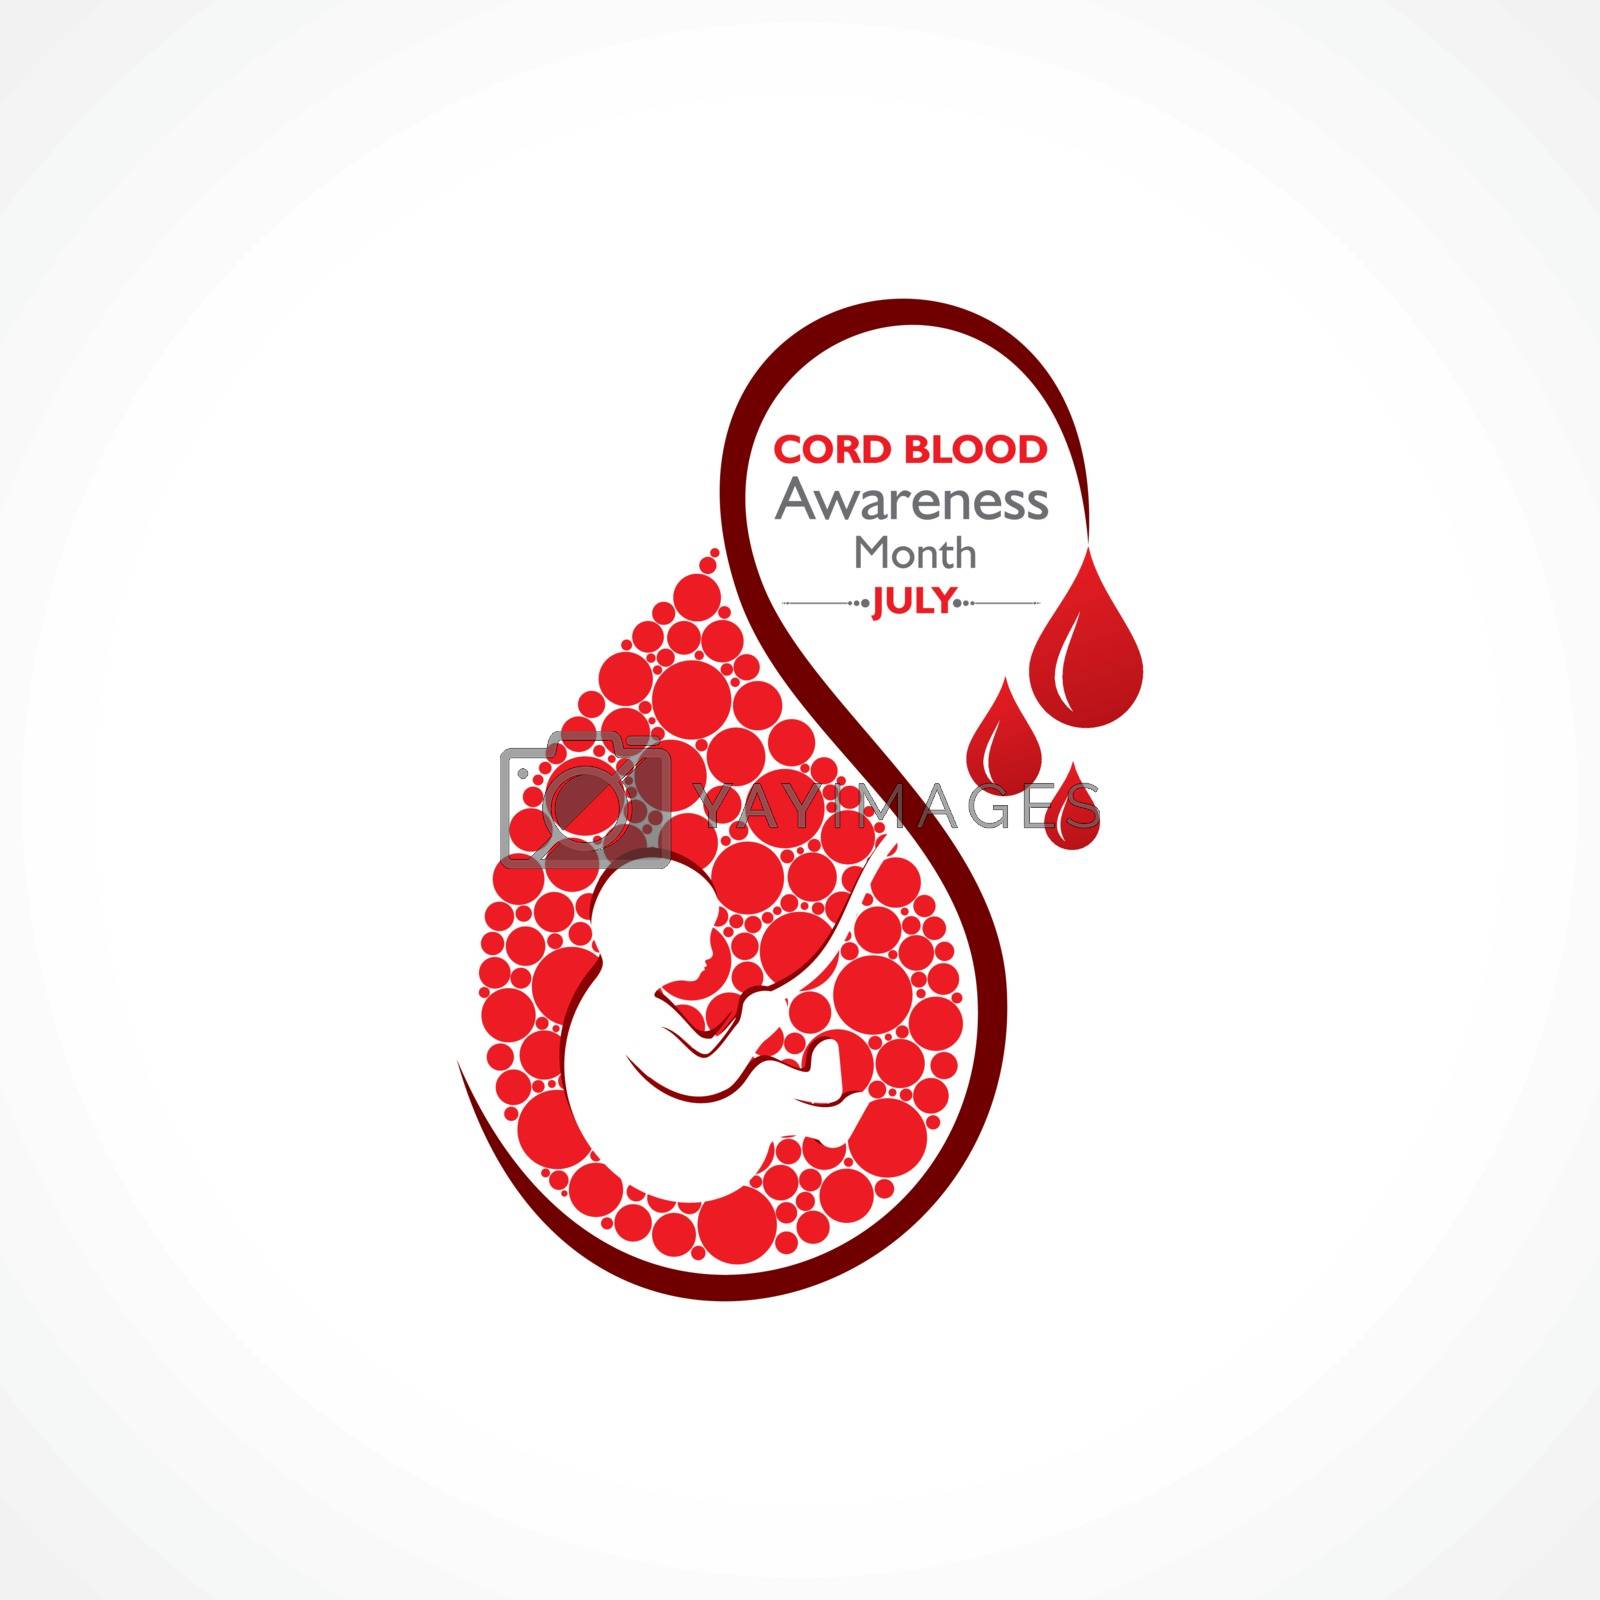 Royalty free image of Cord Blood awareness month observed in July Every Year by graphicsdunia4you